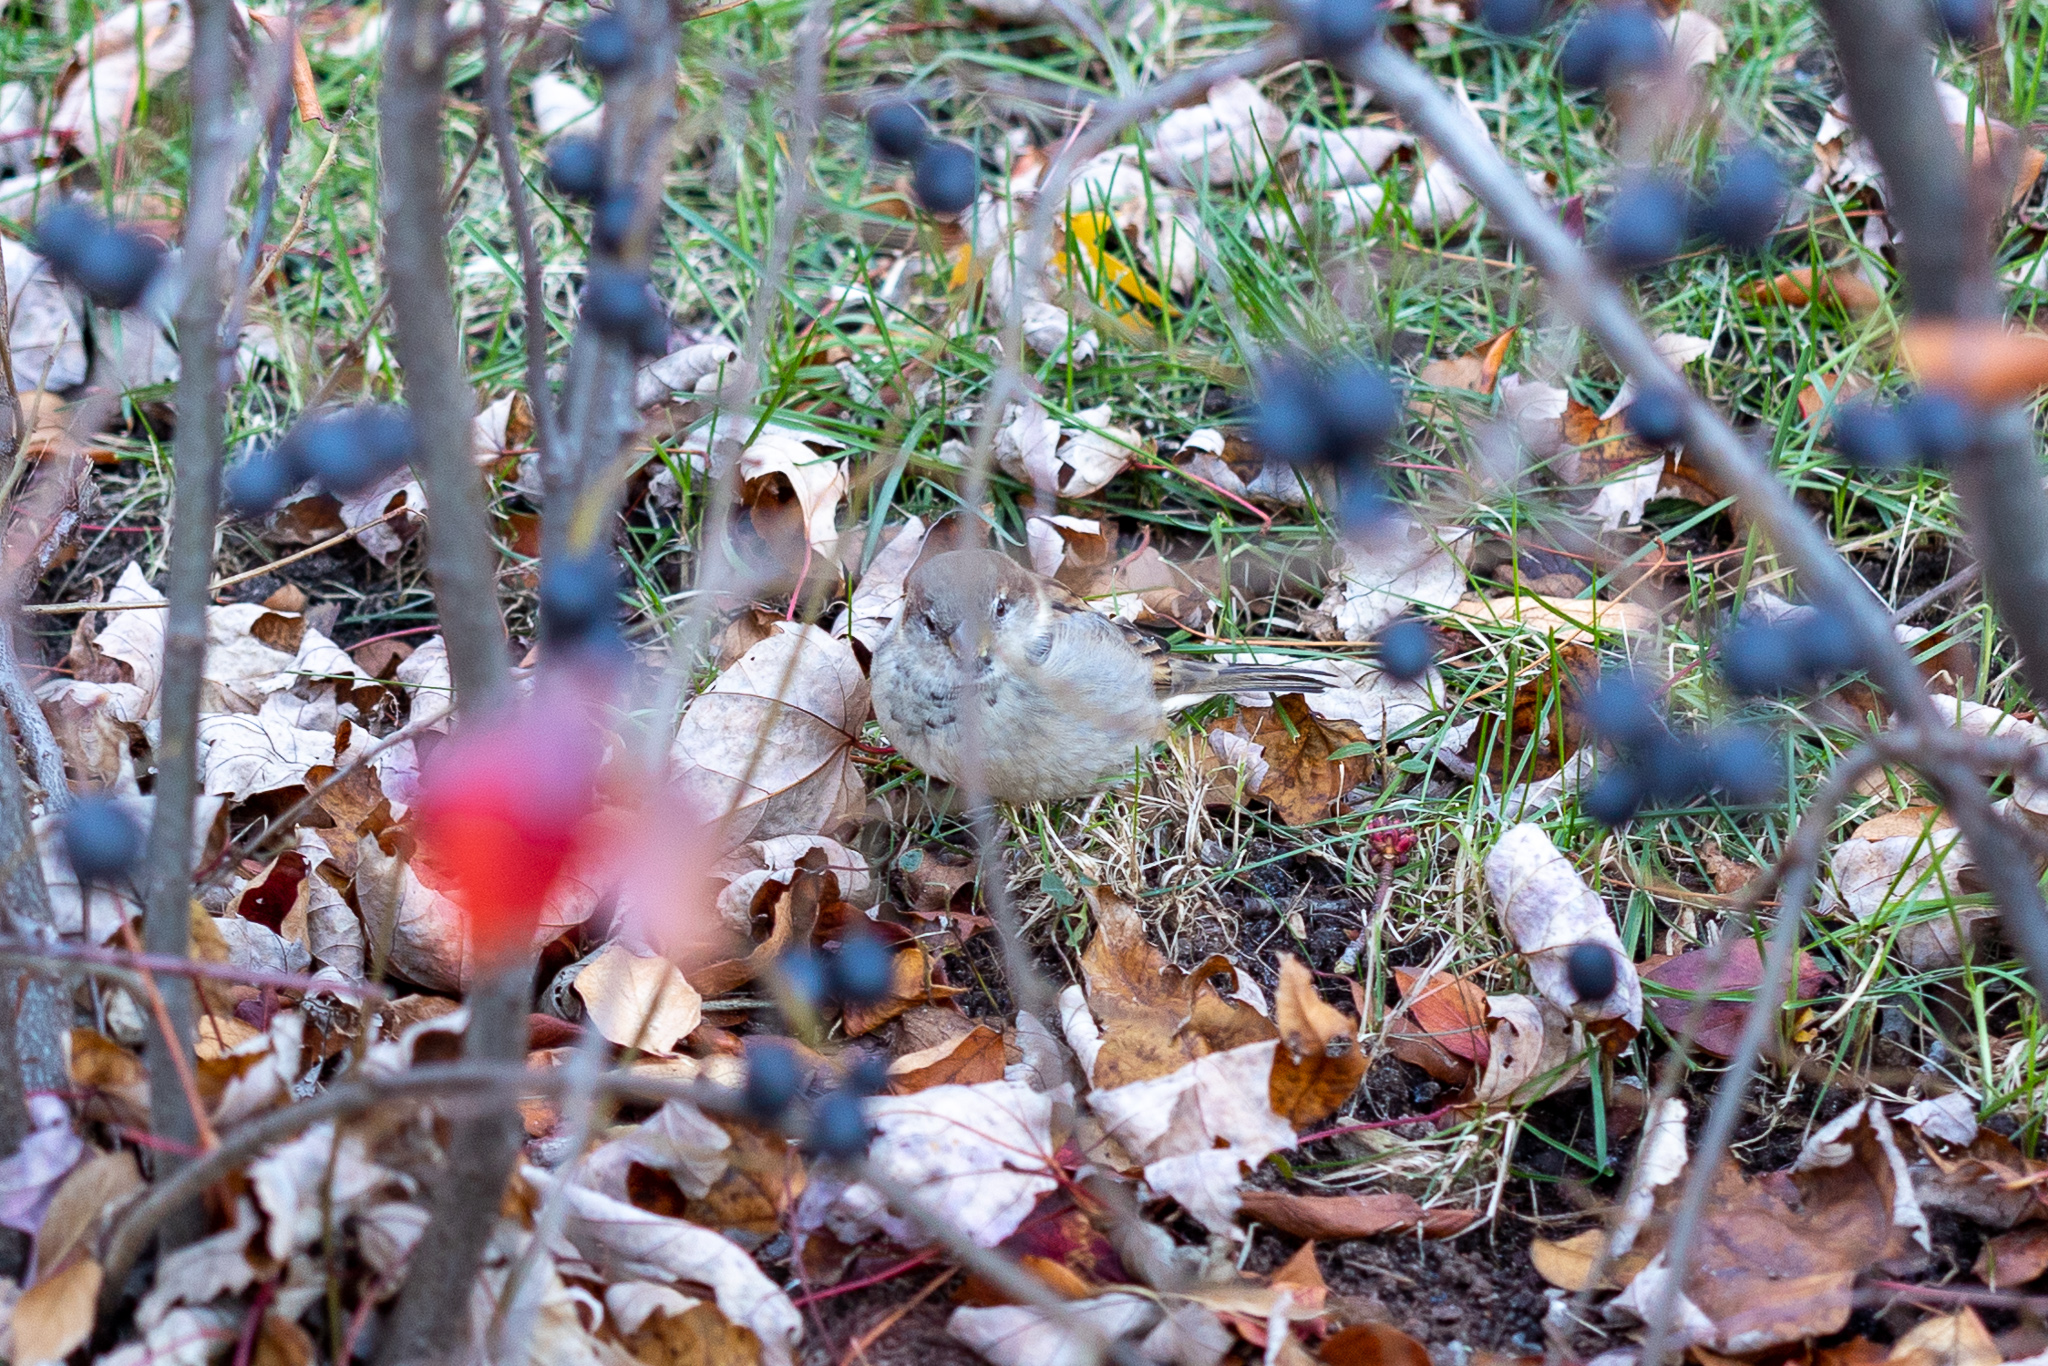 Small bird sitting on the leafy ground behind a blurred foreground of blue berries on bushes